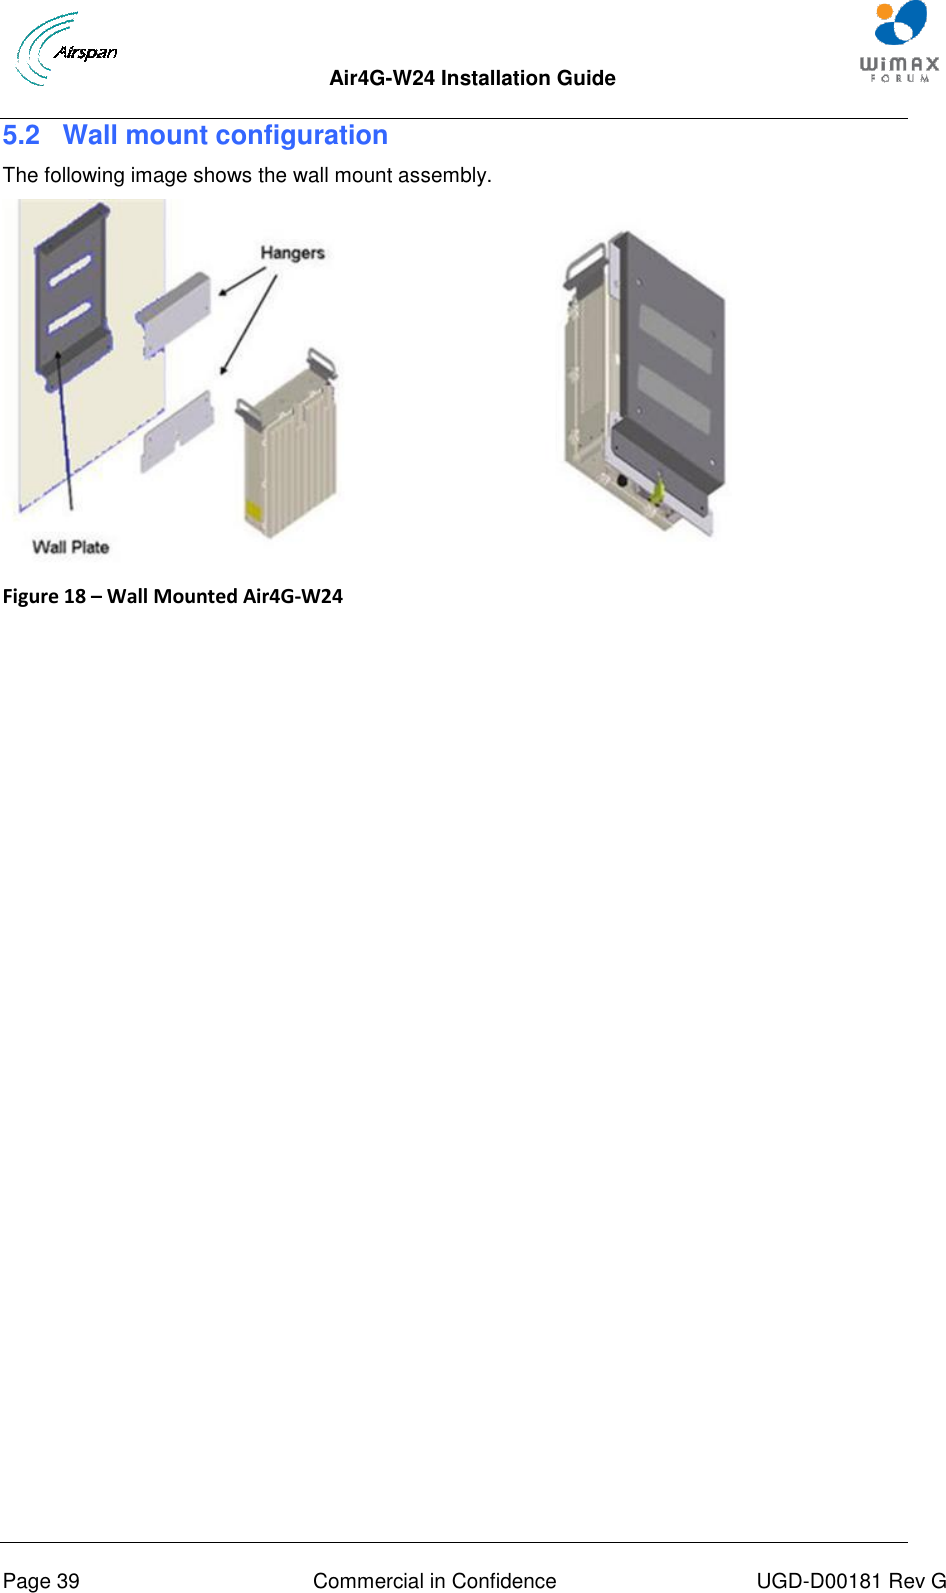  Air4G-W24 Installation Guide       Page 39  Commercial in Confidence  UGD-D00181 Rev G 5.2  Wall mount configuration The following image shows the wall mount assembly.  Figure 18 – Wall Mounted Air4G-W24   